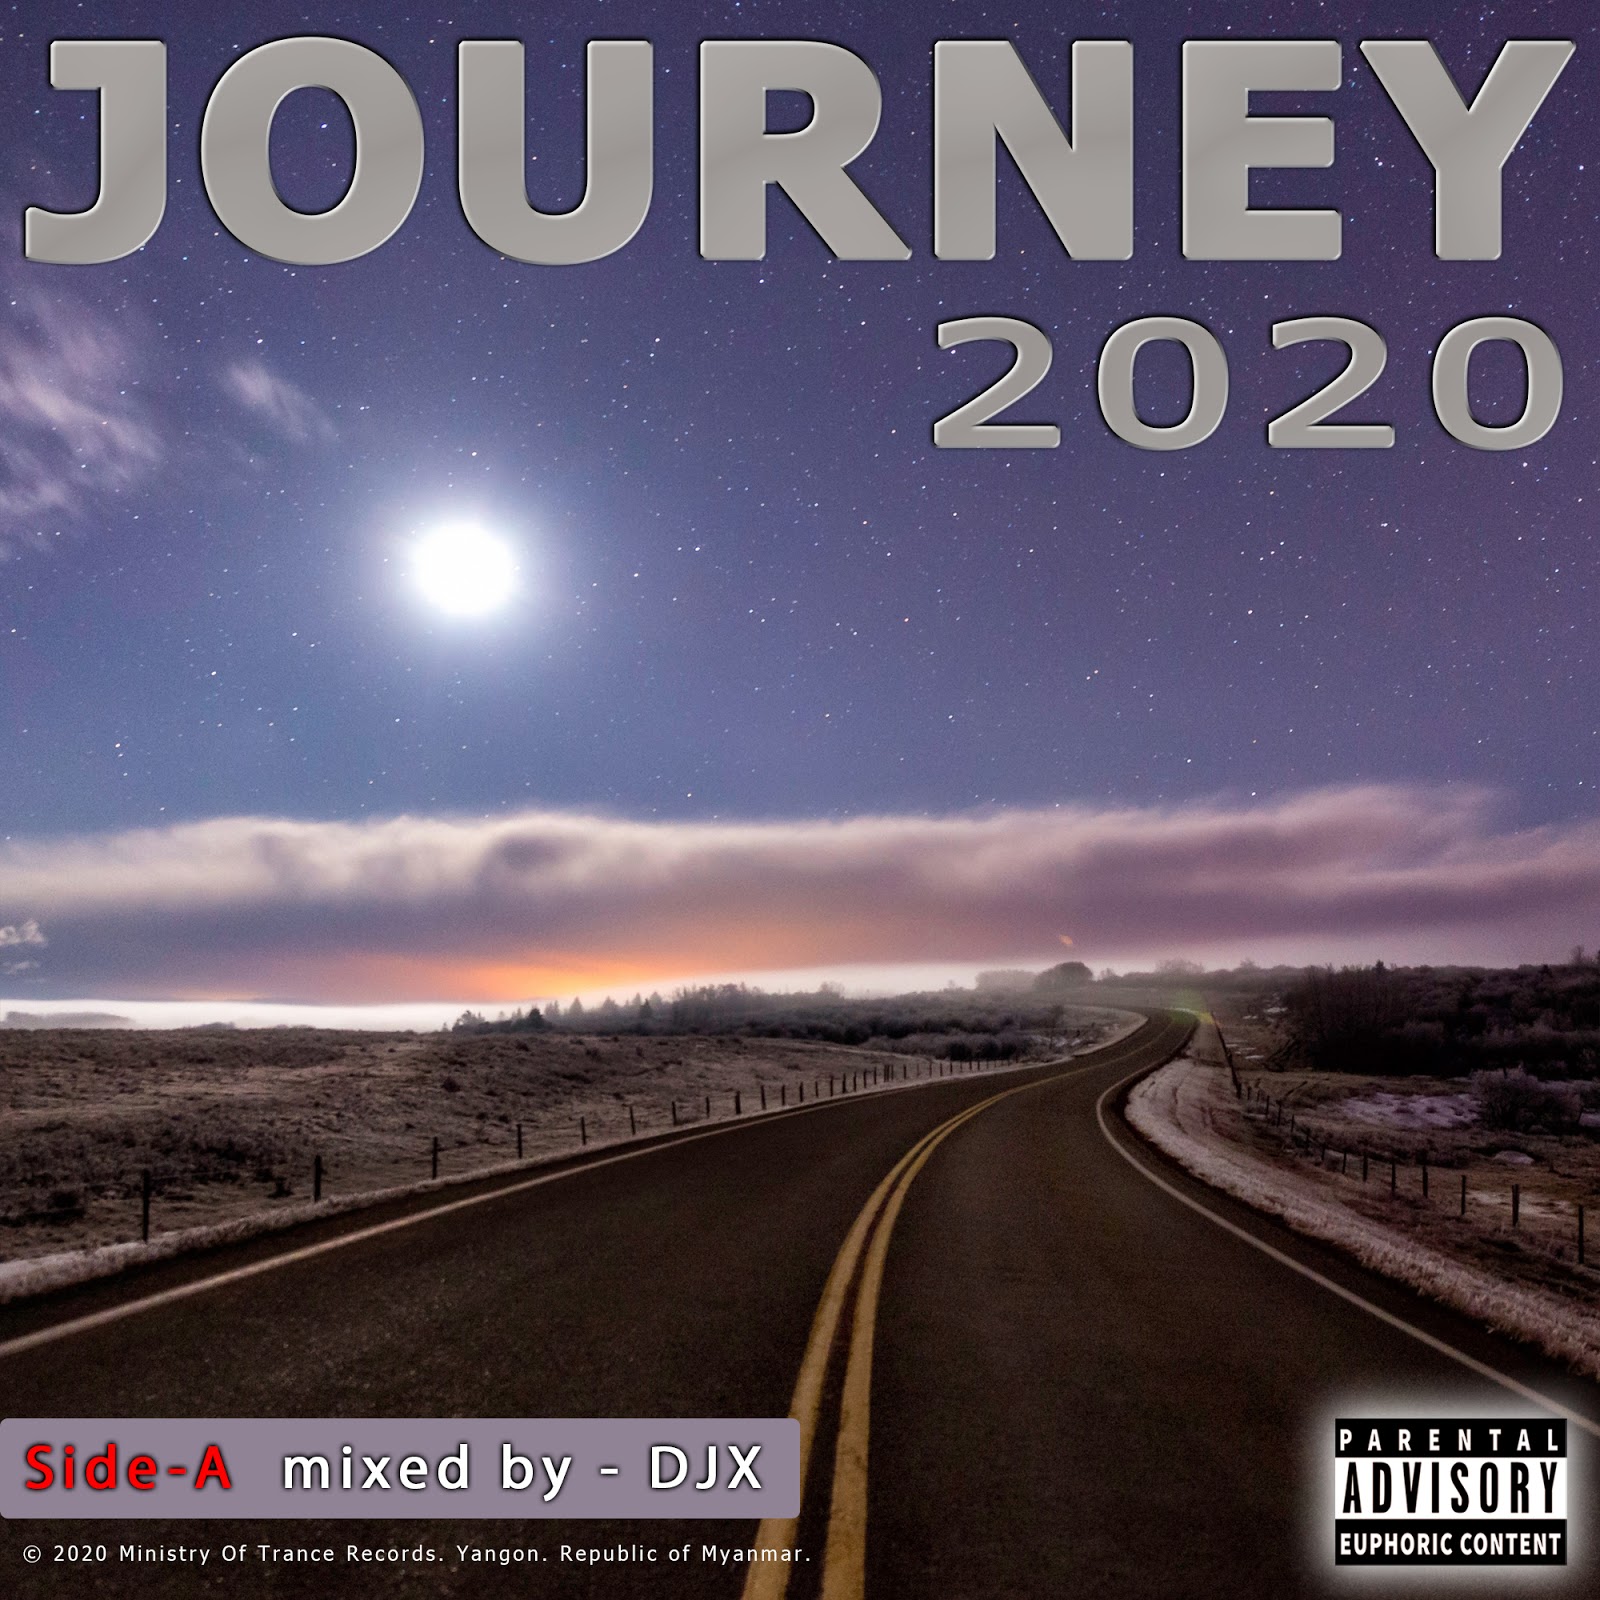 Mix journey. Beyond the clouds.